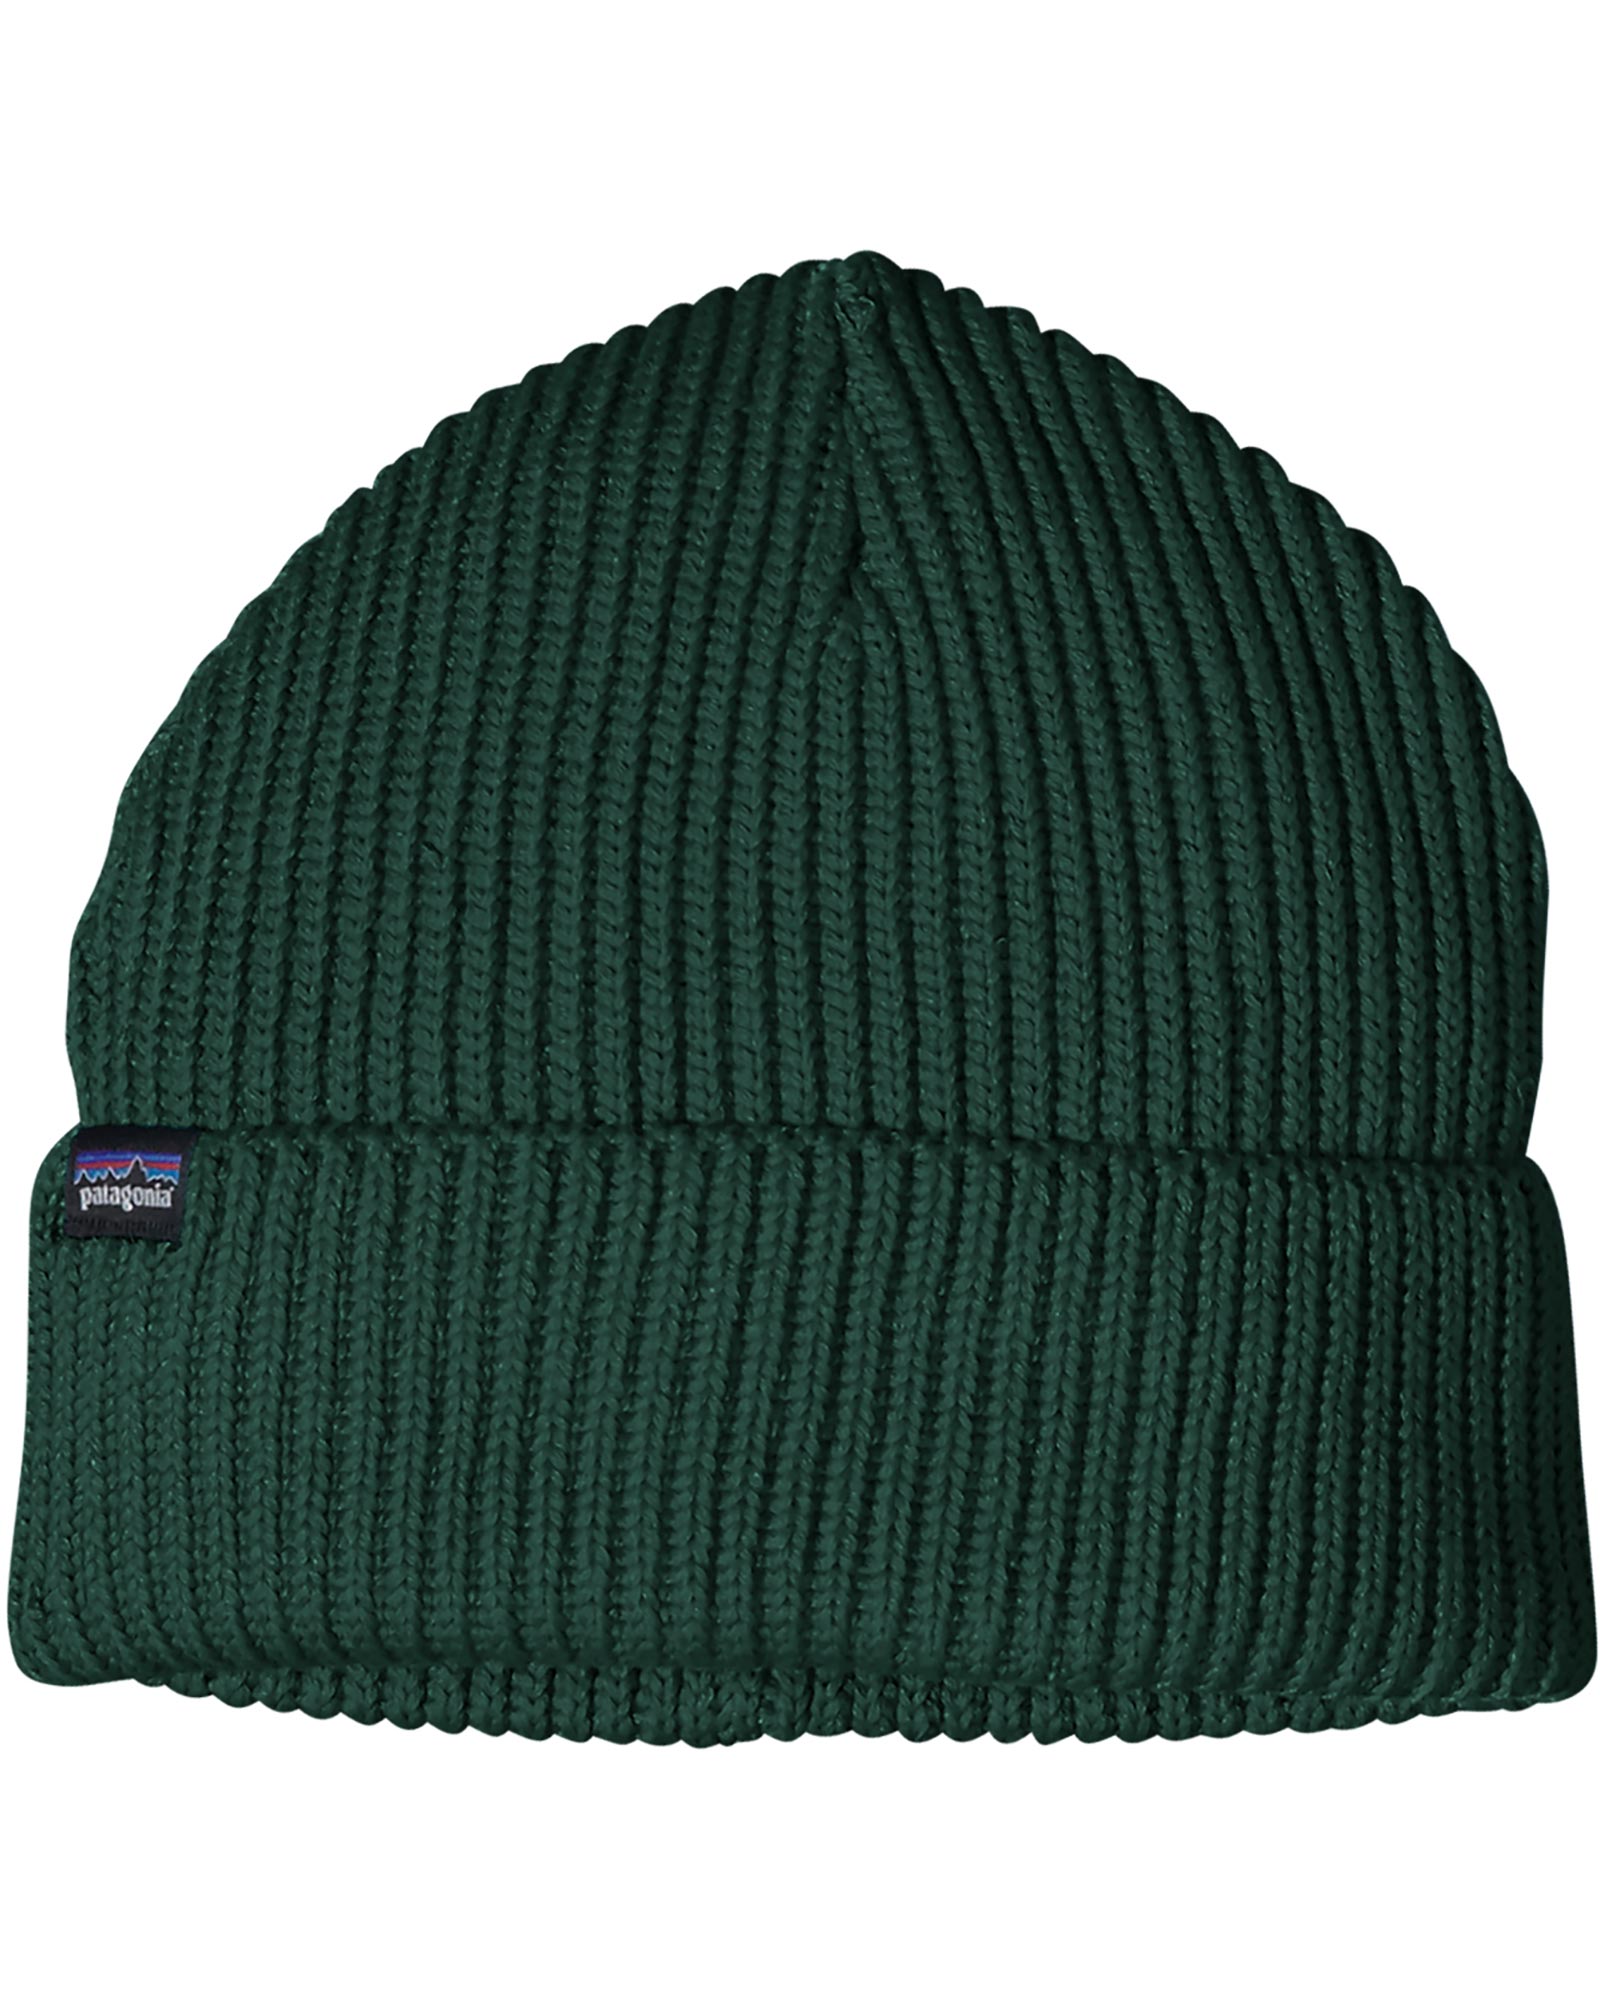 Patagonia Fishermans Rolled Beanie - Nouveau Green